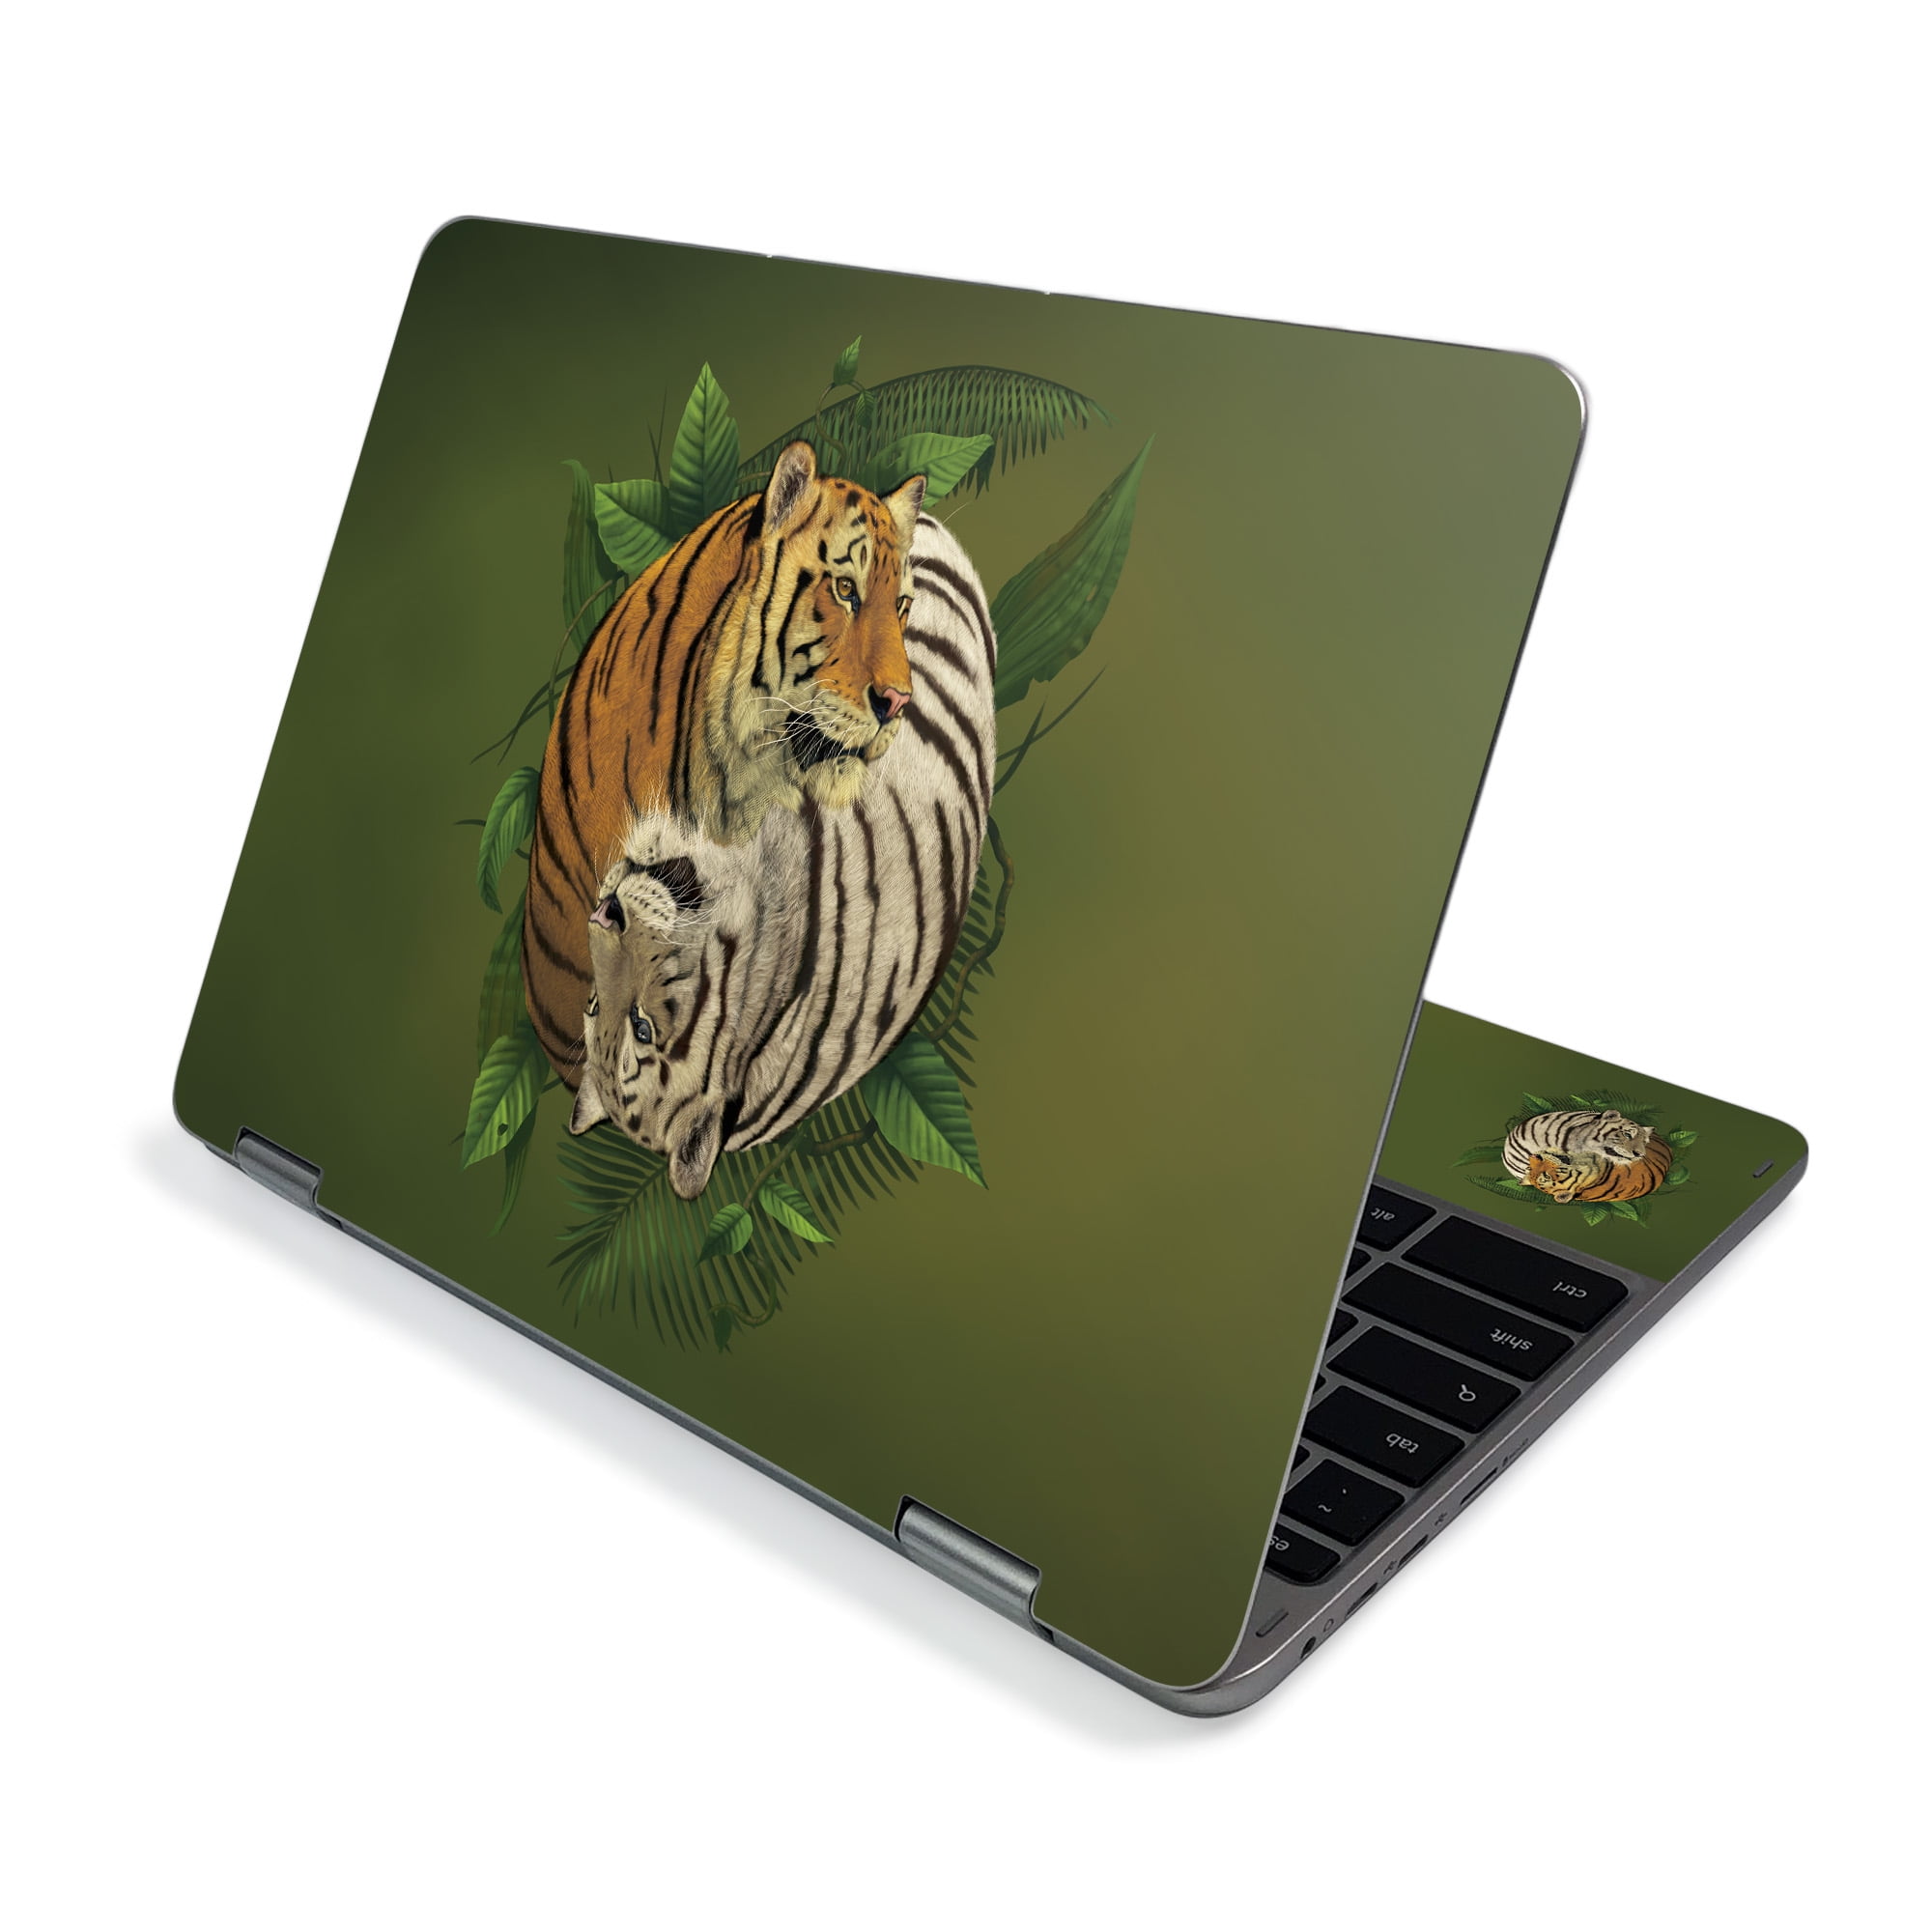 Cute Skin For Samsung Chromebook Plus V2 12" (2019) Protective, Durable, and Unique Vinyl